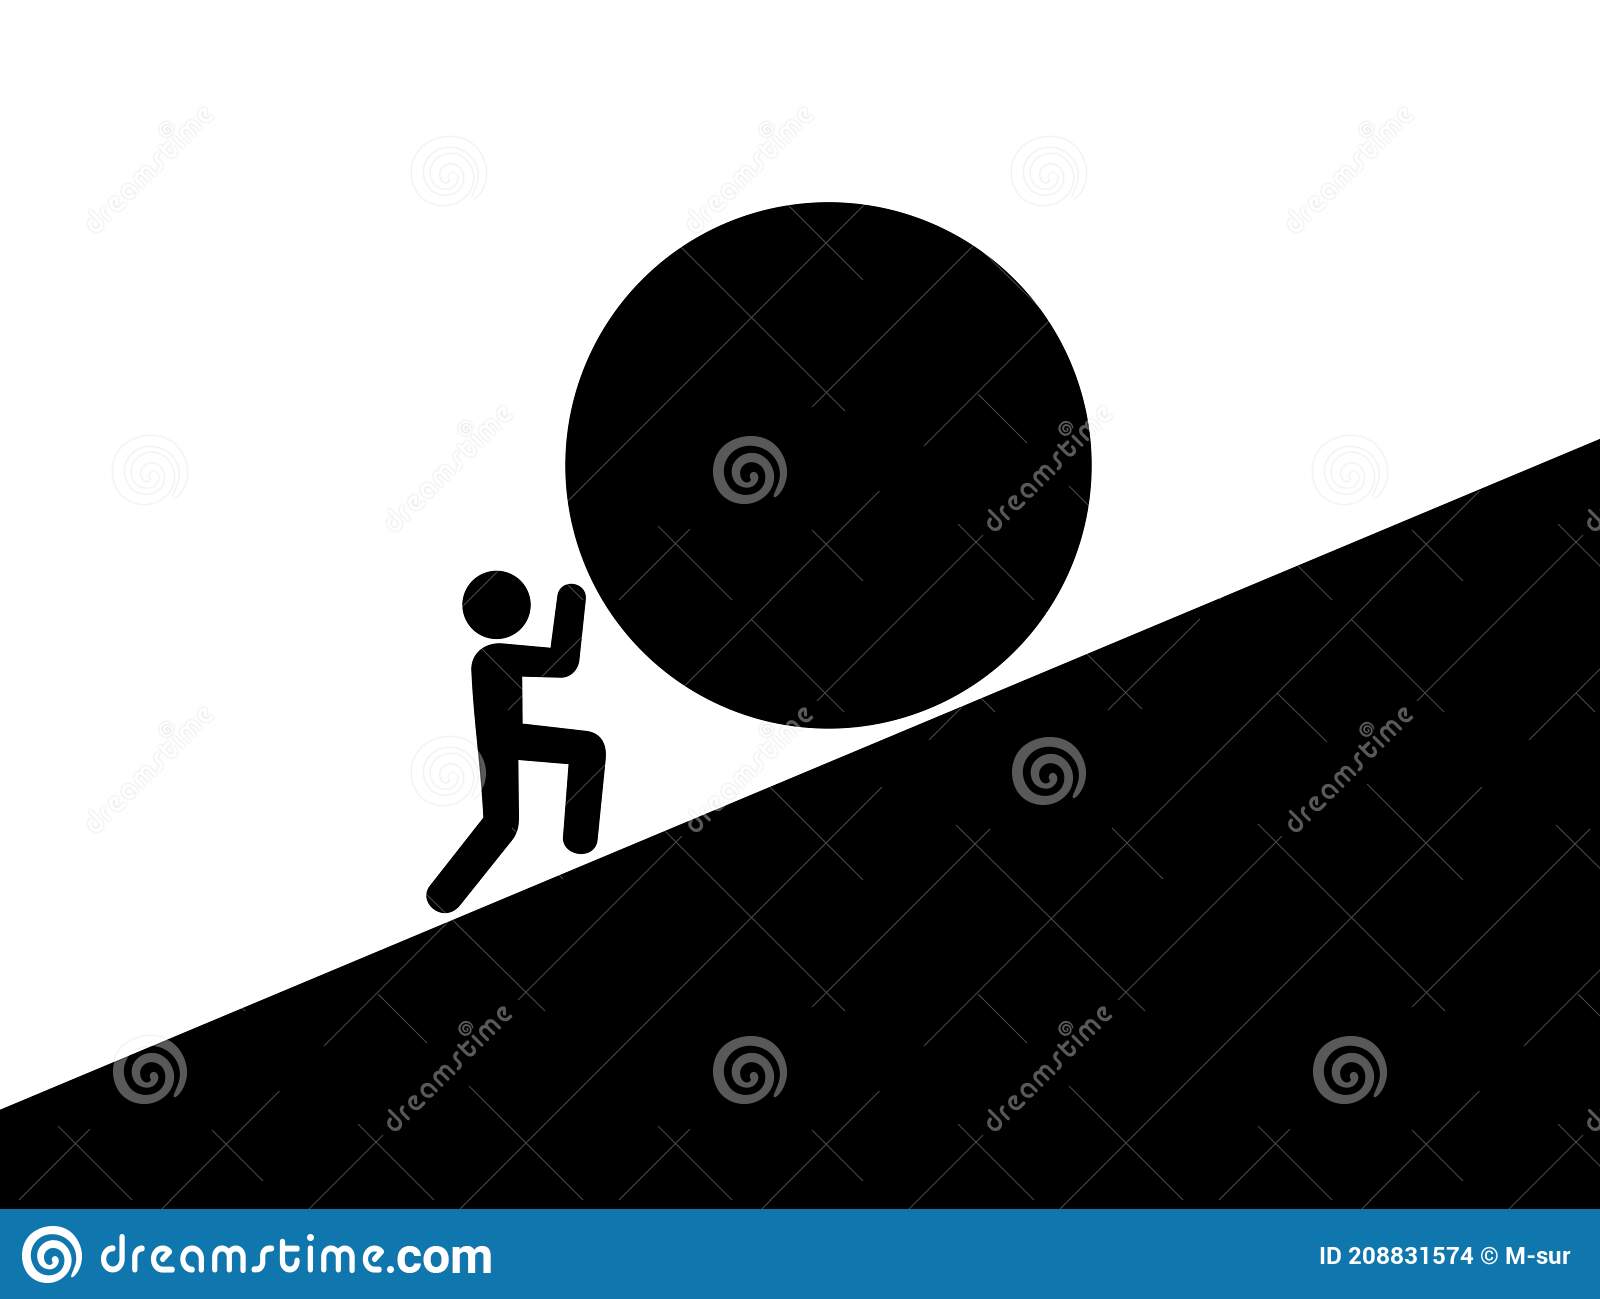 who was sisyphus in ancient greek mythology and why was sisyphus forced to roll a large rock up a hill